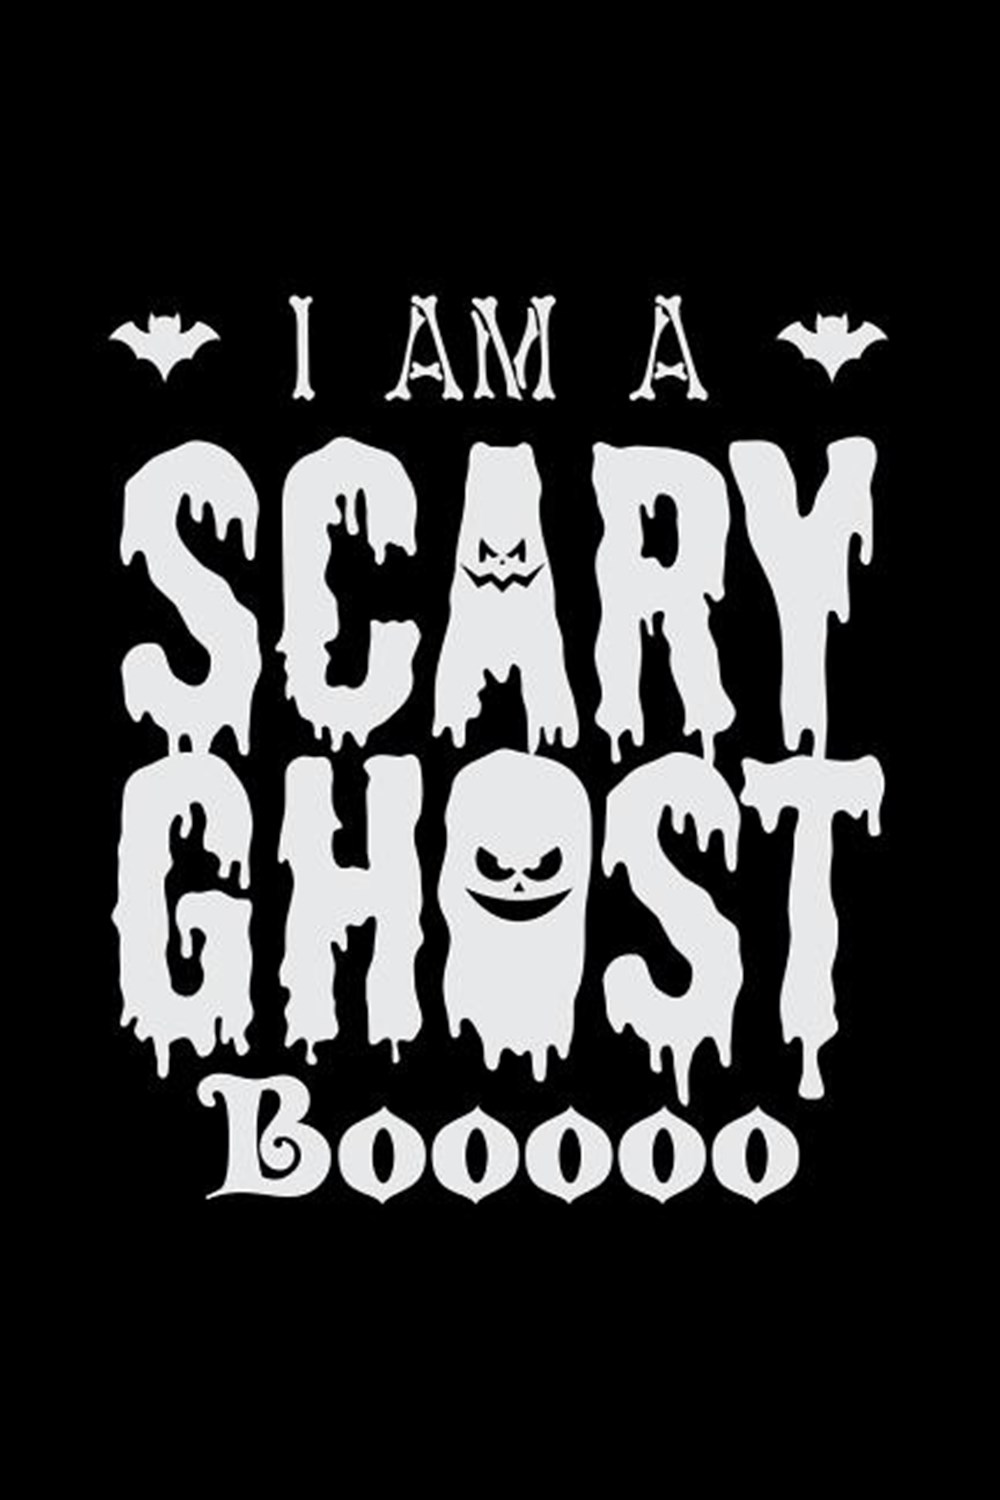 I Am A Scary Ghost Booooo Blank Paper Sketch Book - Artist Sketch Pad Journal for Sketching, Doodlin